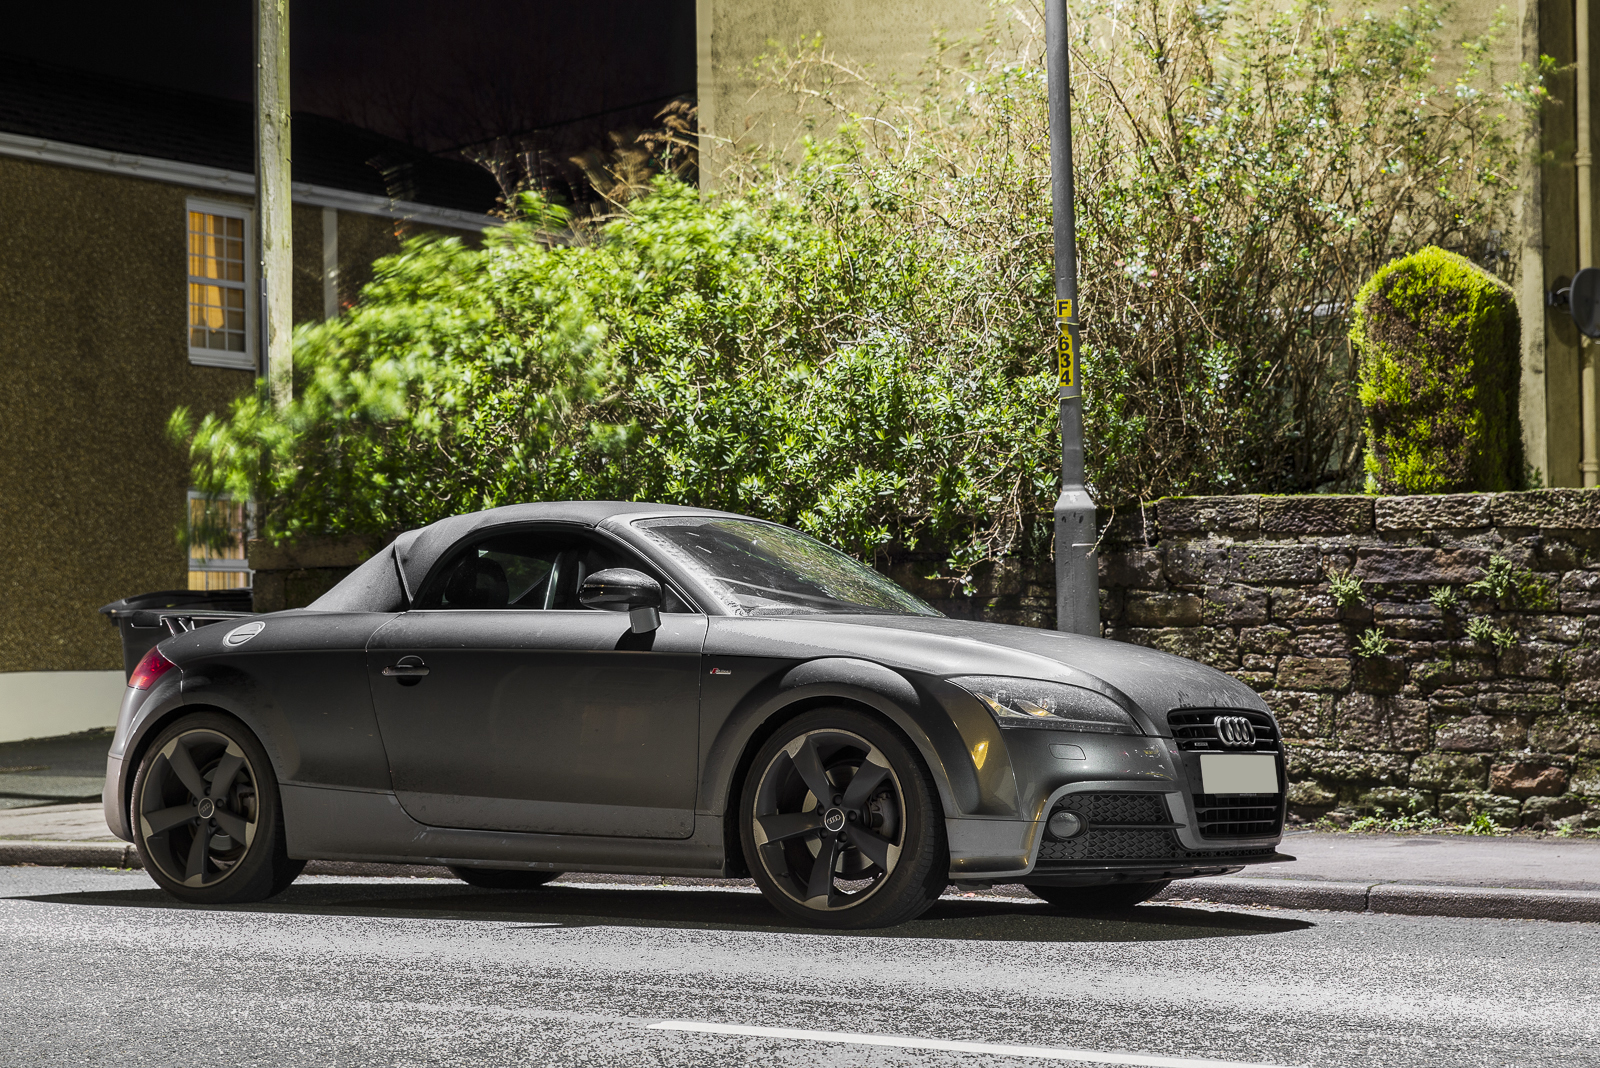 An Audi TT Black Edition in for a Stage 1 Remap at Ultimate Tuning, Cleator Moor, United Kingdom. 10 January, 2016